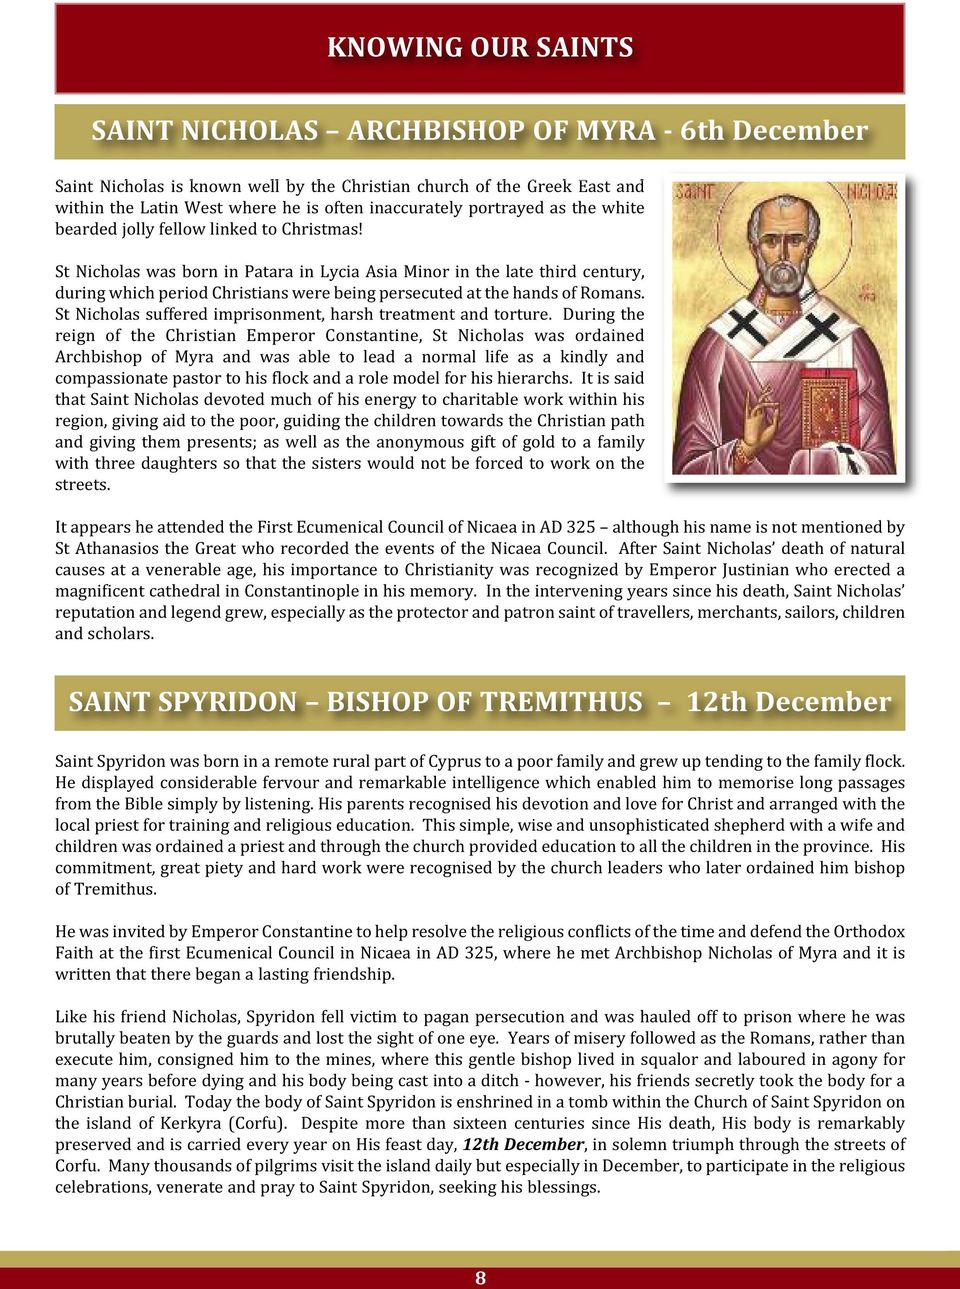 St Nicholas was born in Patara in Lycia Asia Minor in the late third century, during which period Christians were being persecuted at the hands of Romans.